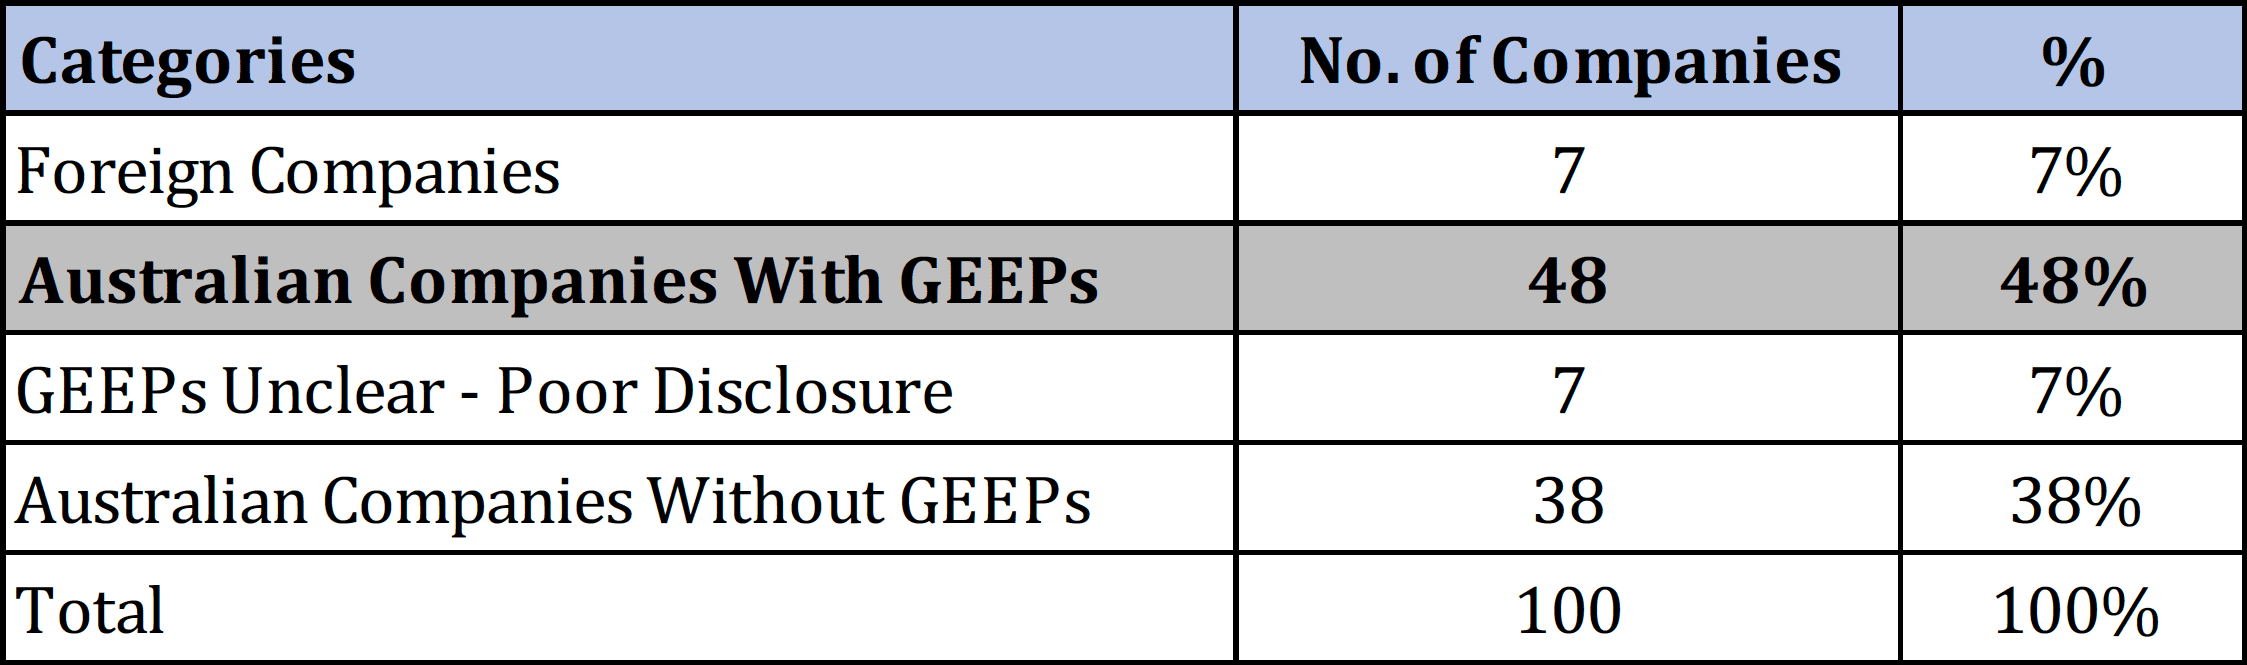 Of 100 ASX100 companies, 38 did not have a GEEP and 7 were unclear as to whether or not they had one; our analysis relates to the balance of 48 companies that have GEEPs